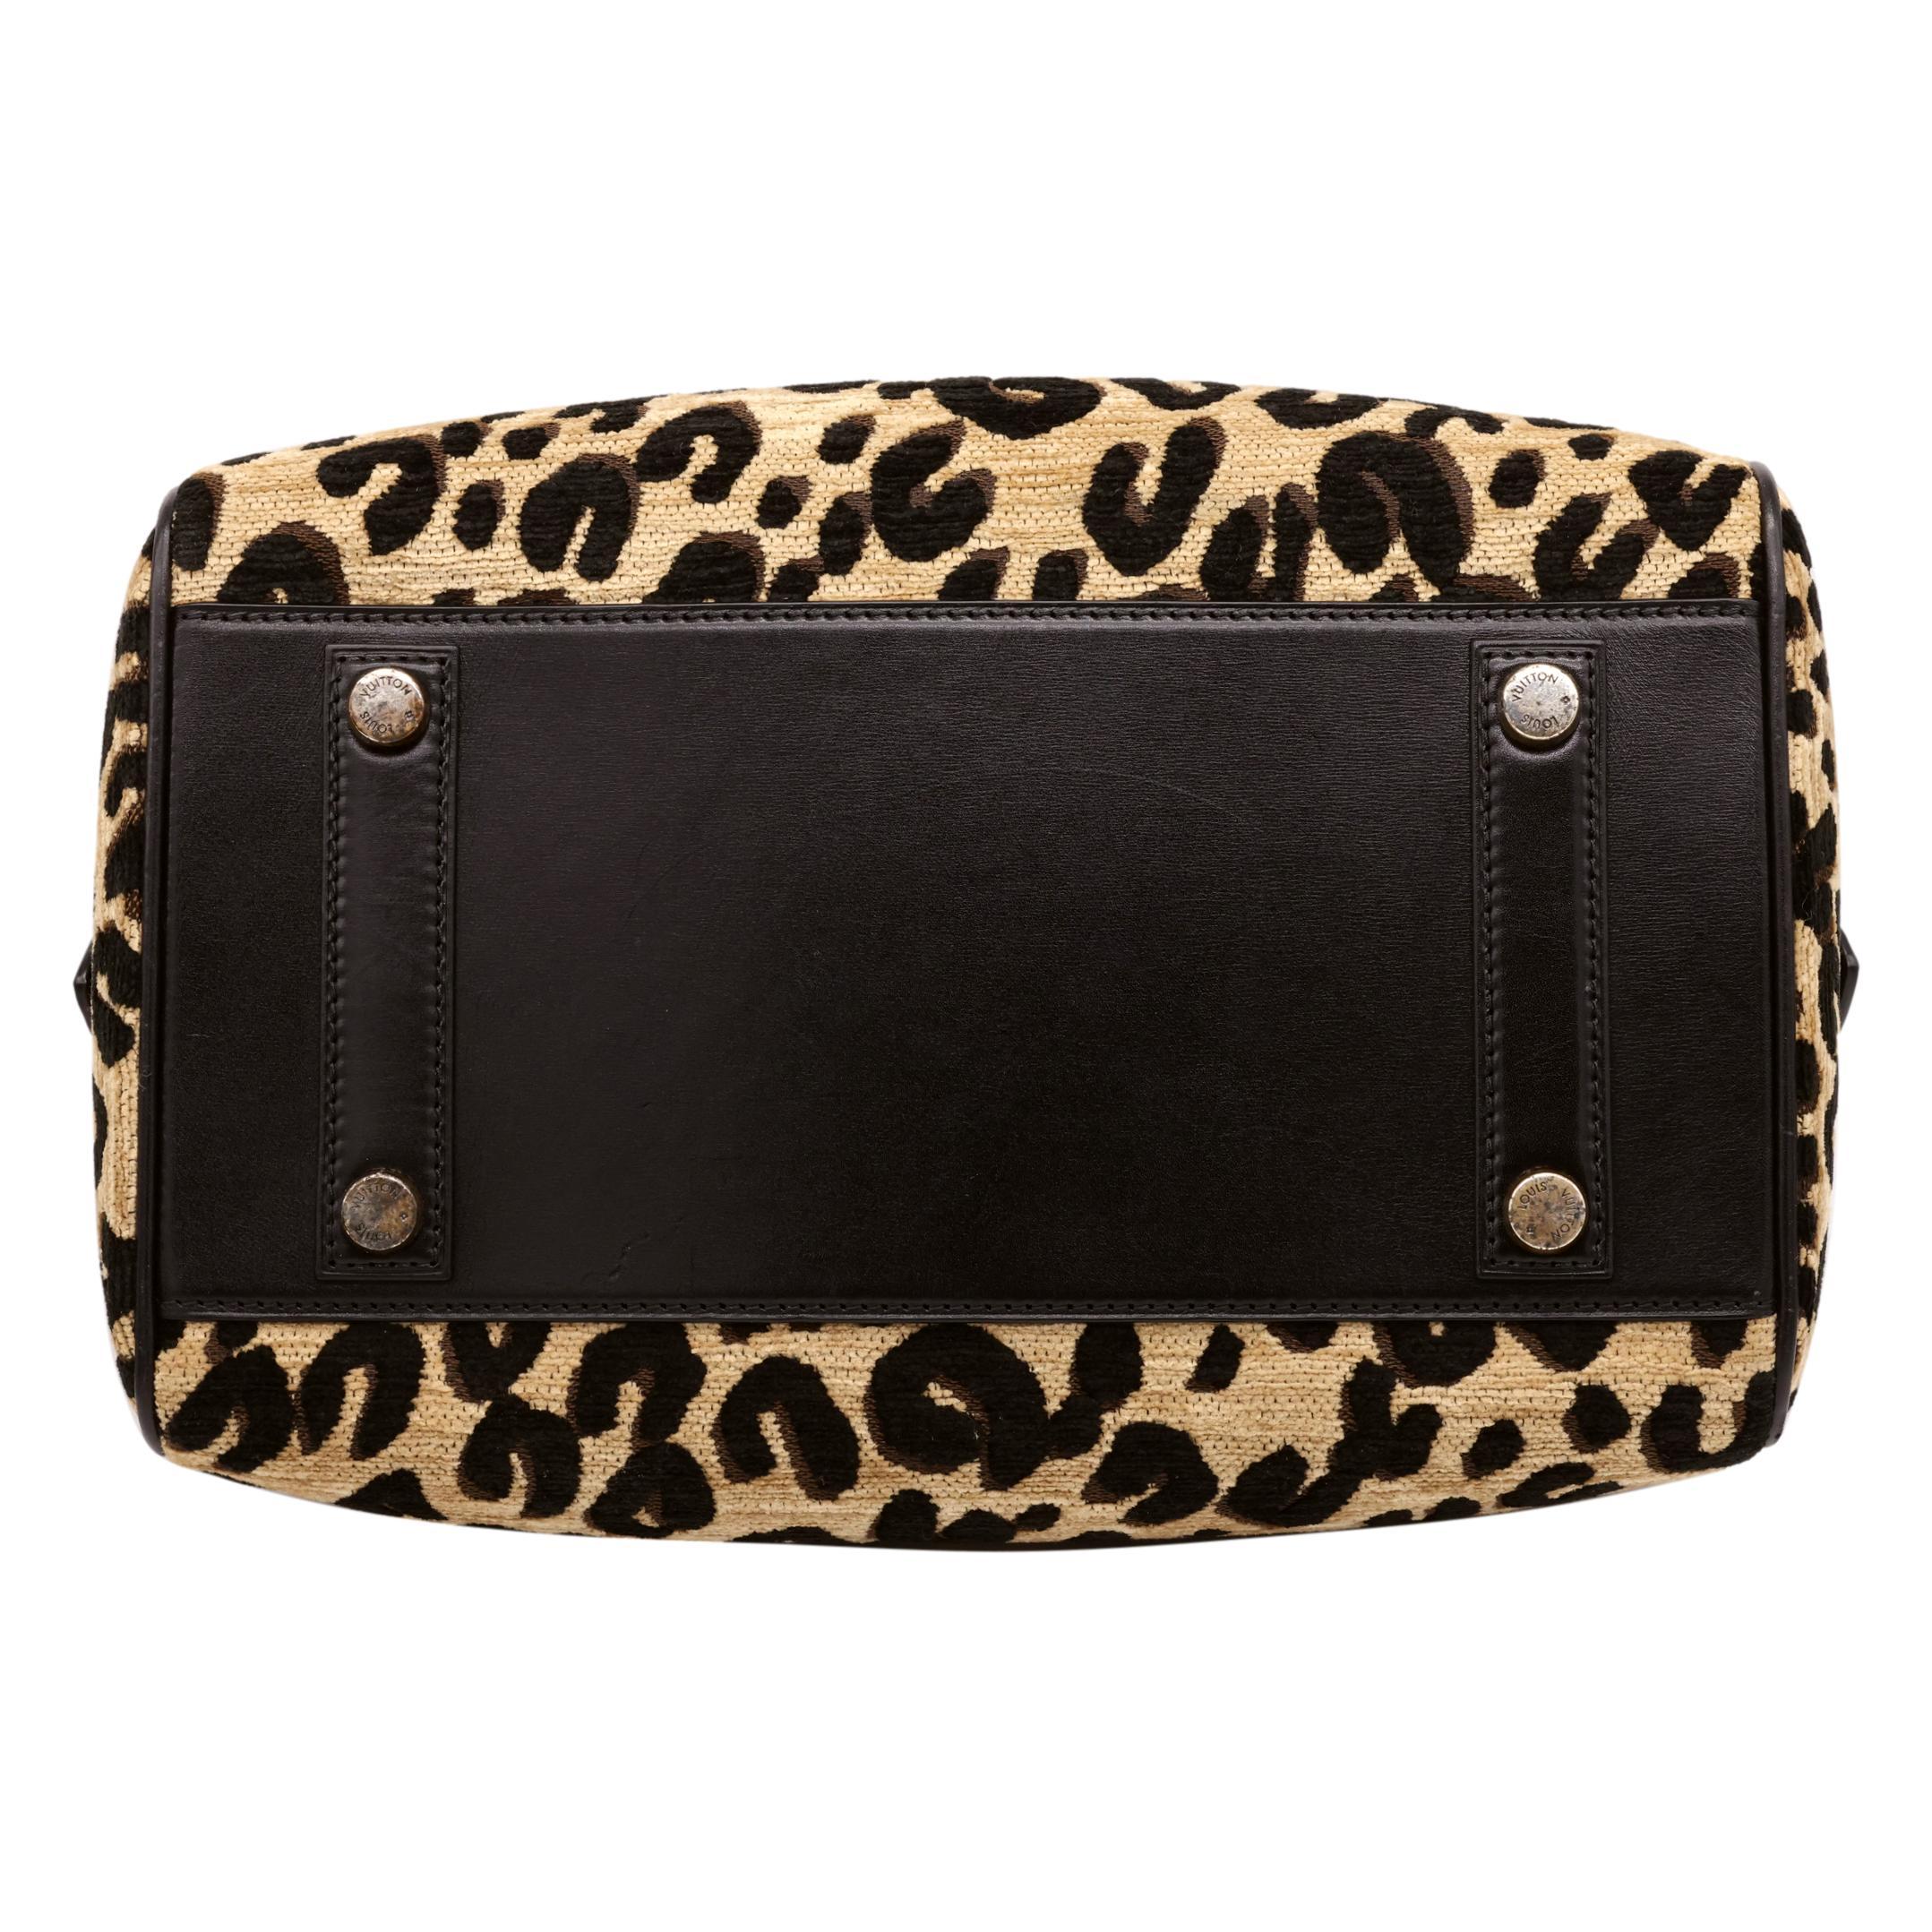 Limited Edition Louis Vuitton x Stephen Sprouse Leopard Speedy Bag, 2012. 1